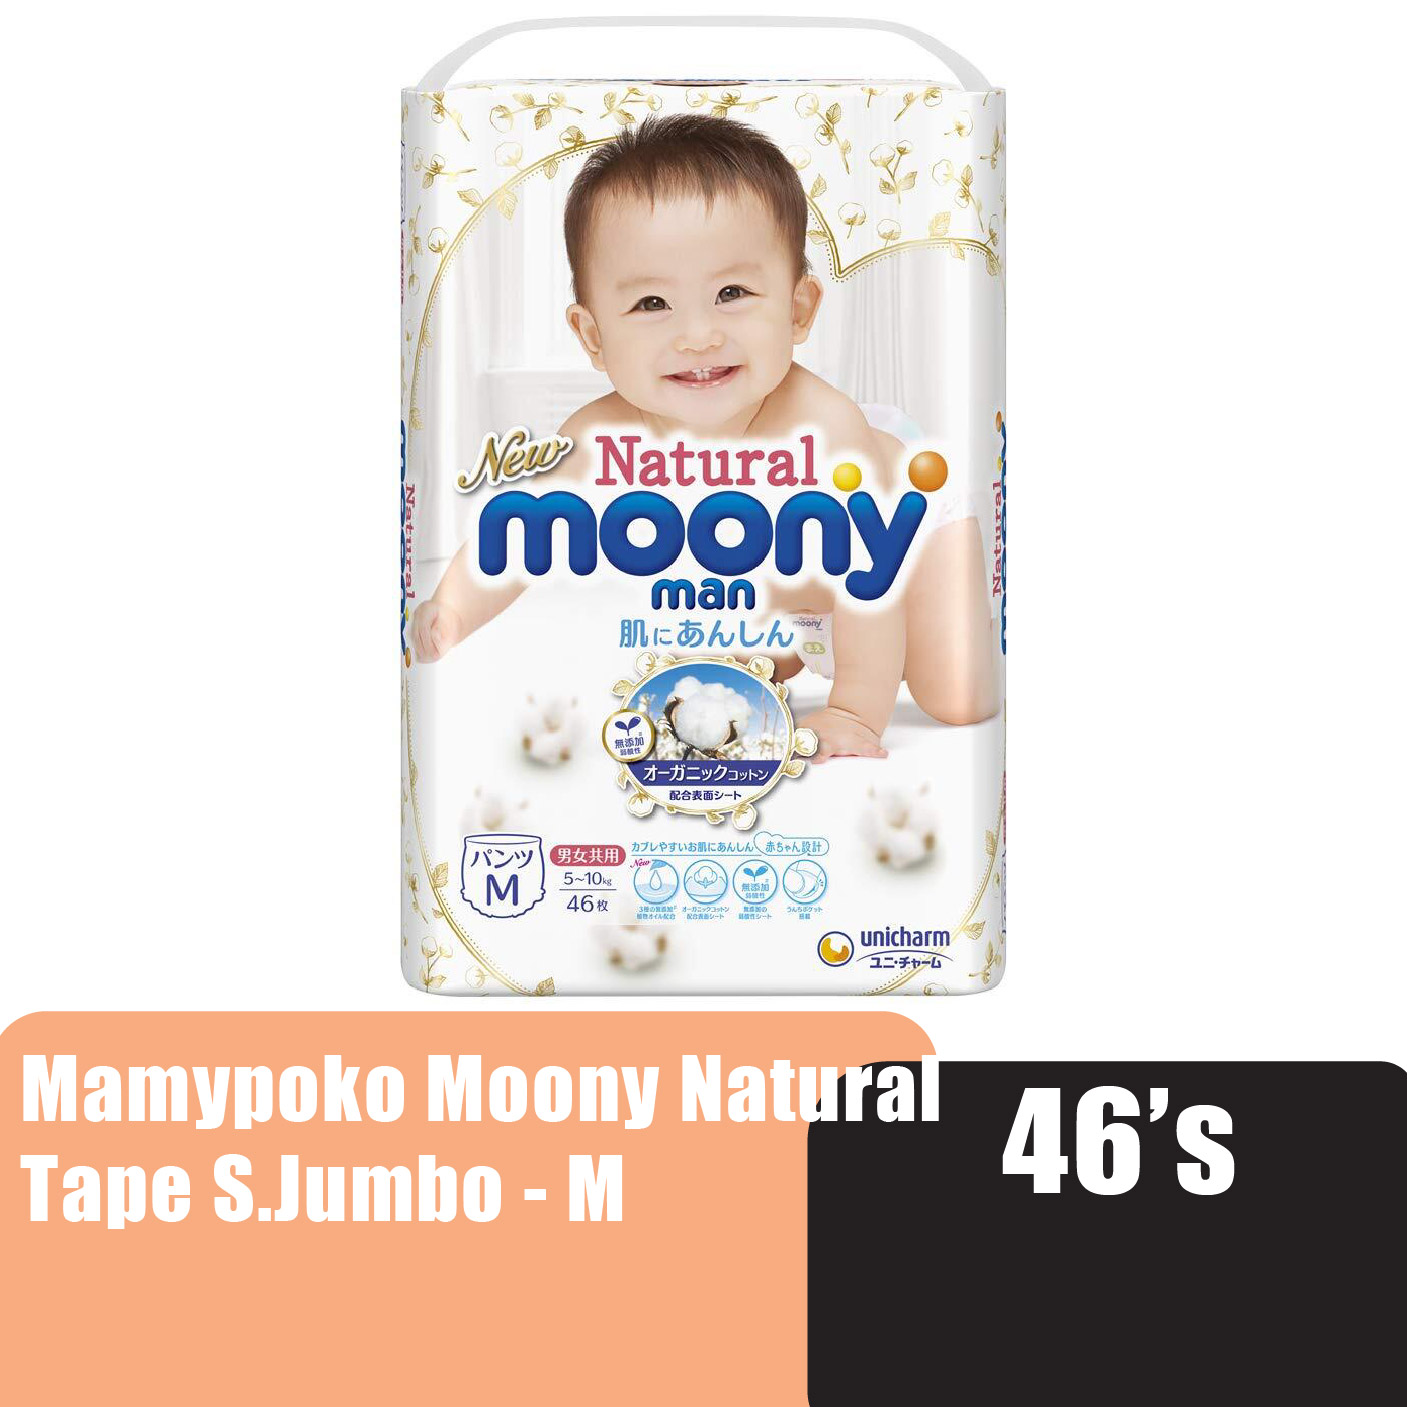 Mamypoko Moony Natural Organic Cotton Baby Diapers (Tape S) Jumbo M46 / Pempes baby suitable for sensitive skin